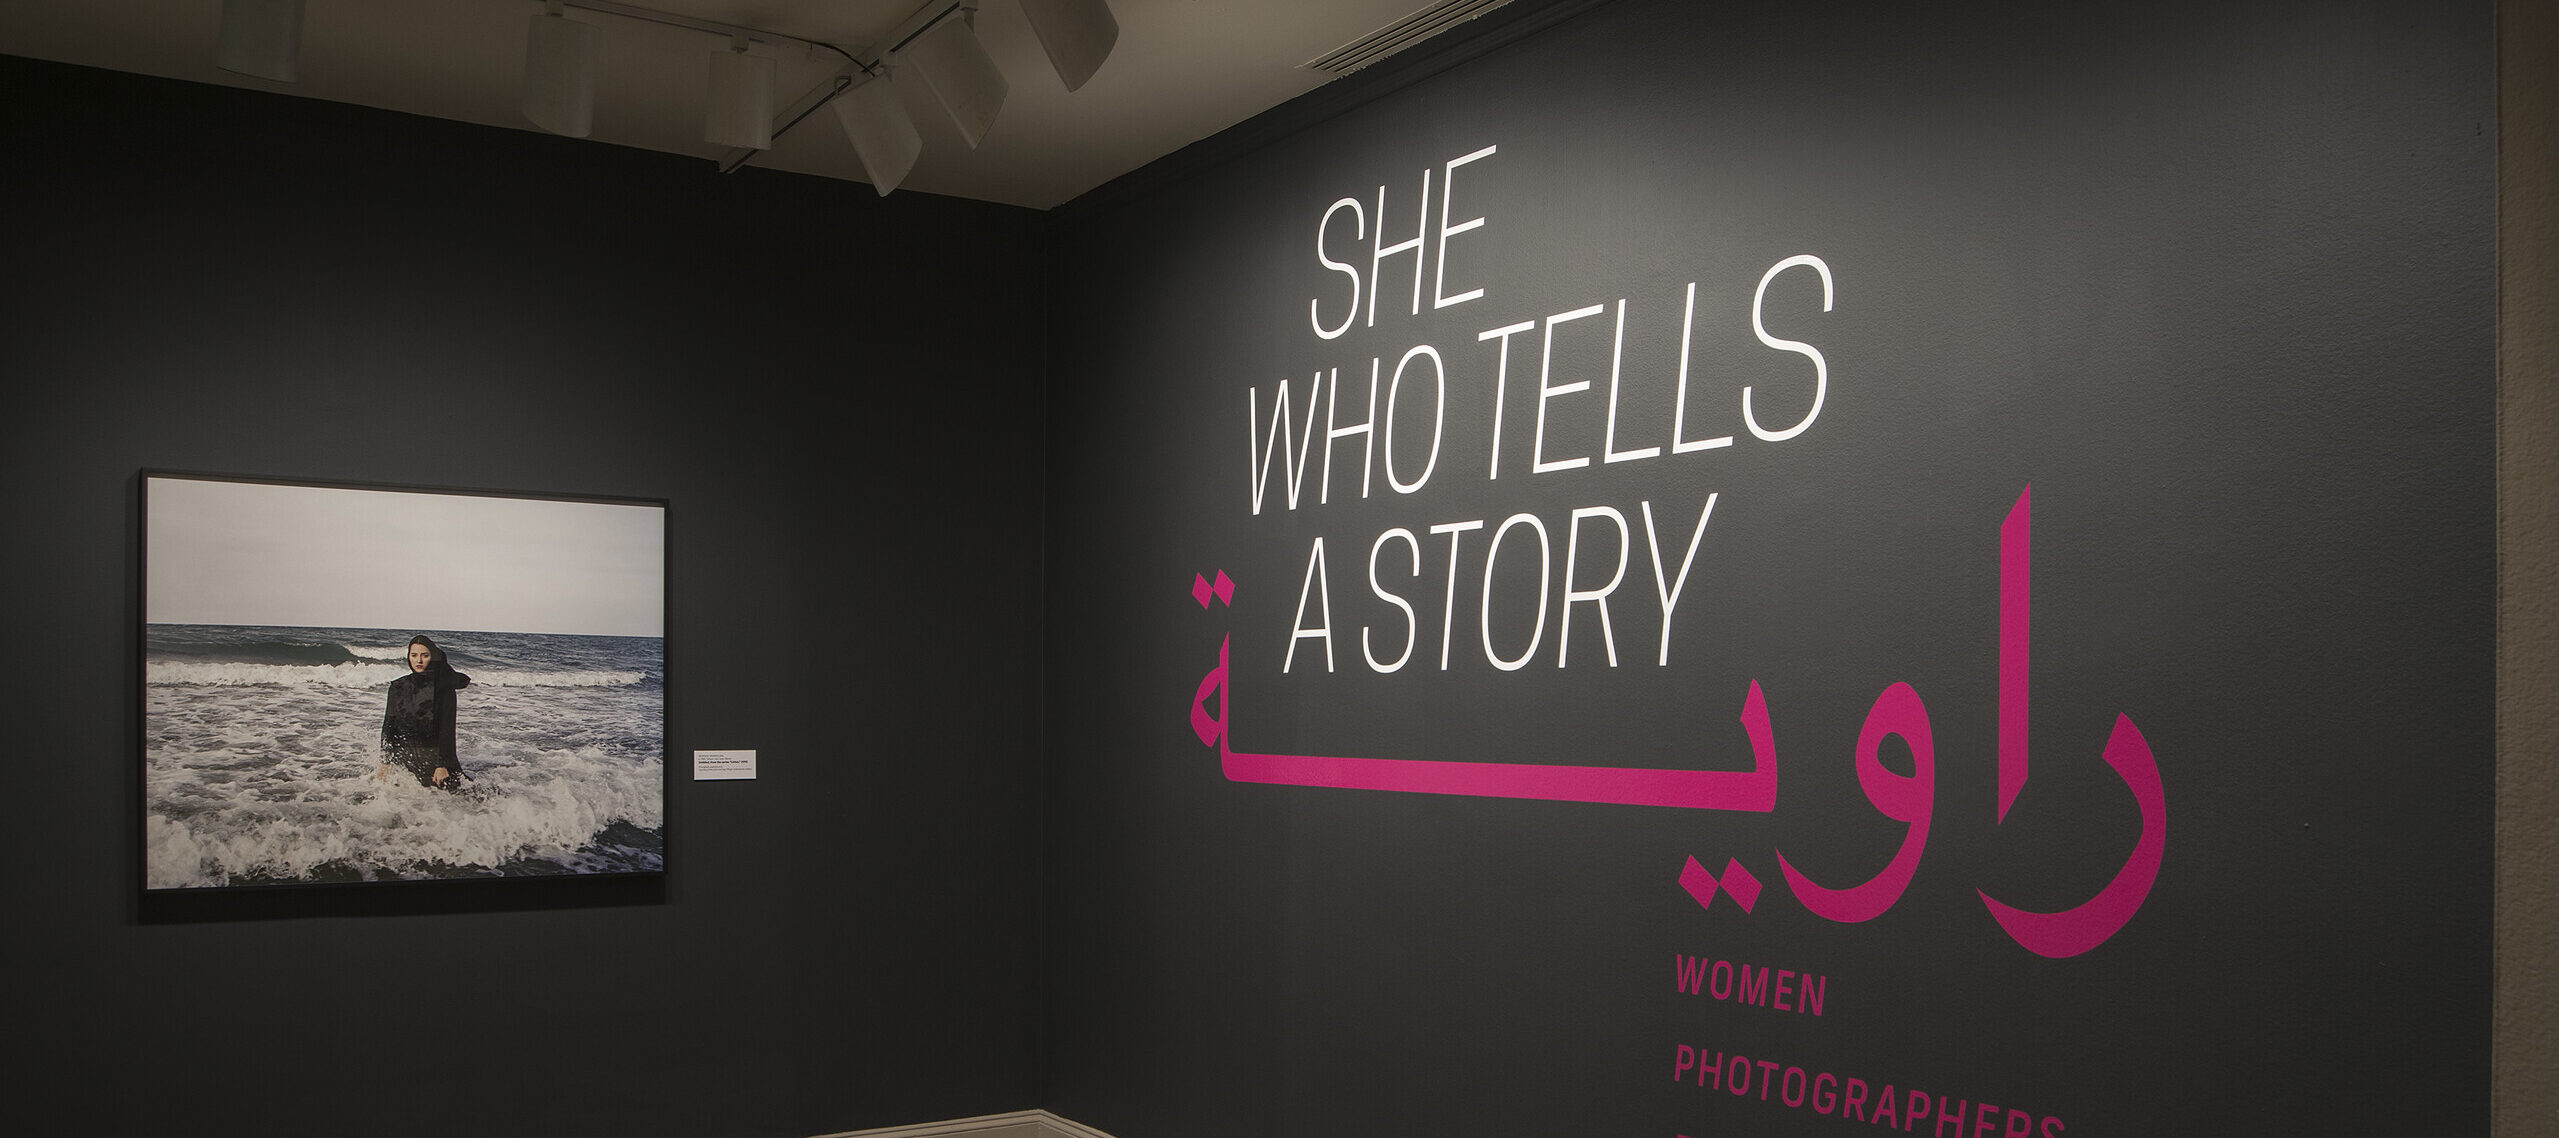 A gallery view of a black wall with a large photograph of a woman. The woman is wearing a long black dress and a head scarf. She is standing in the ocean, surrounded by waves. On the right wall is a text that says 